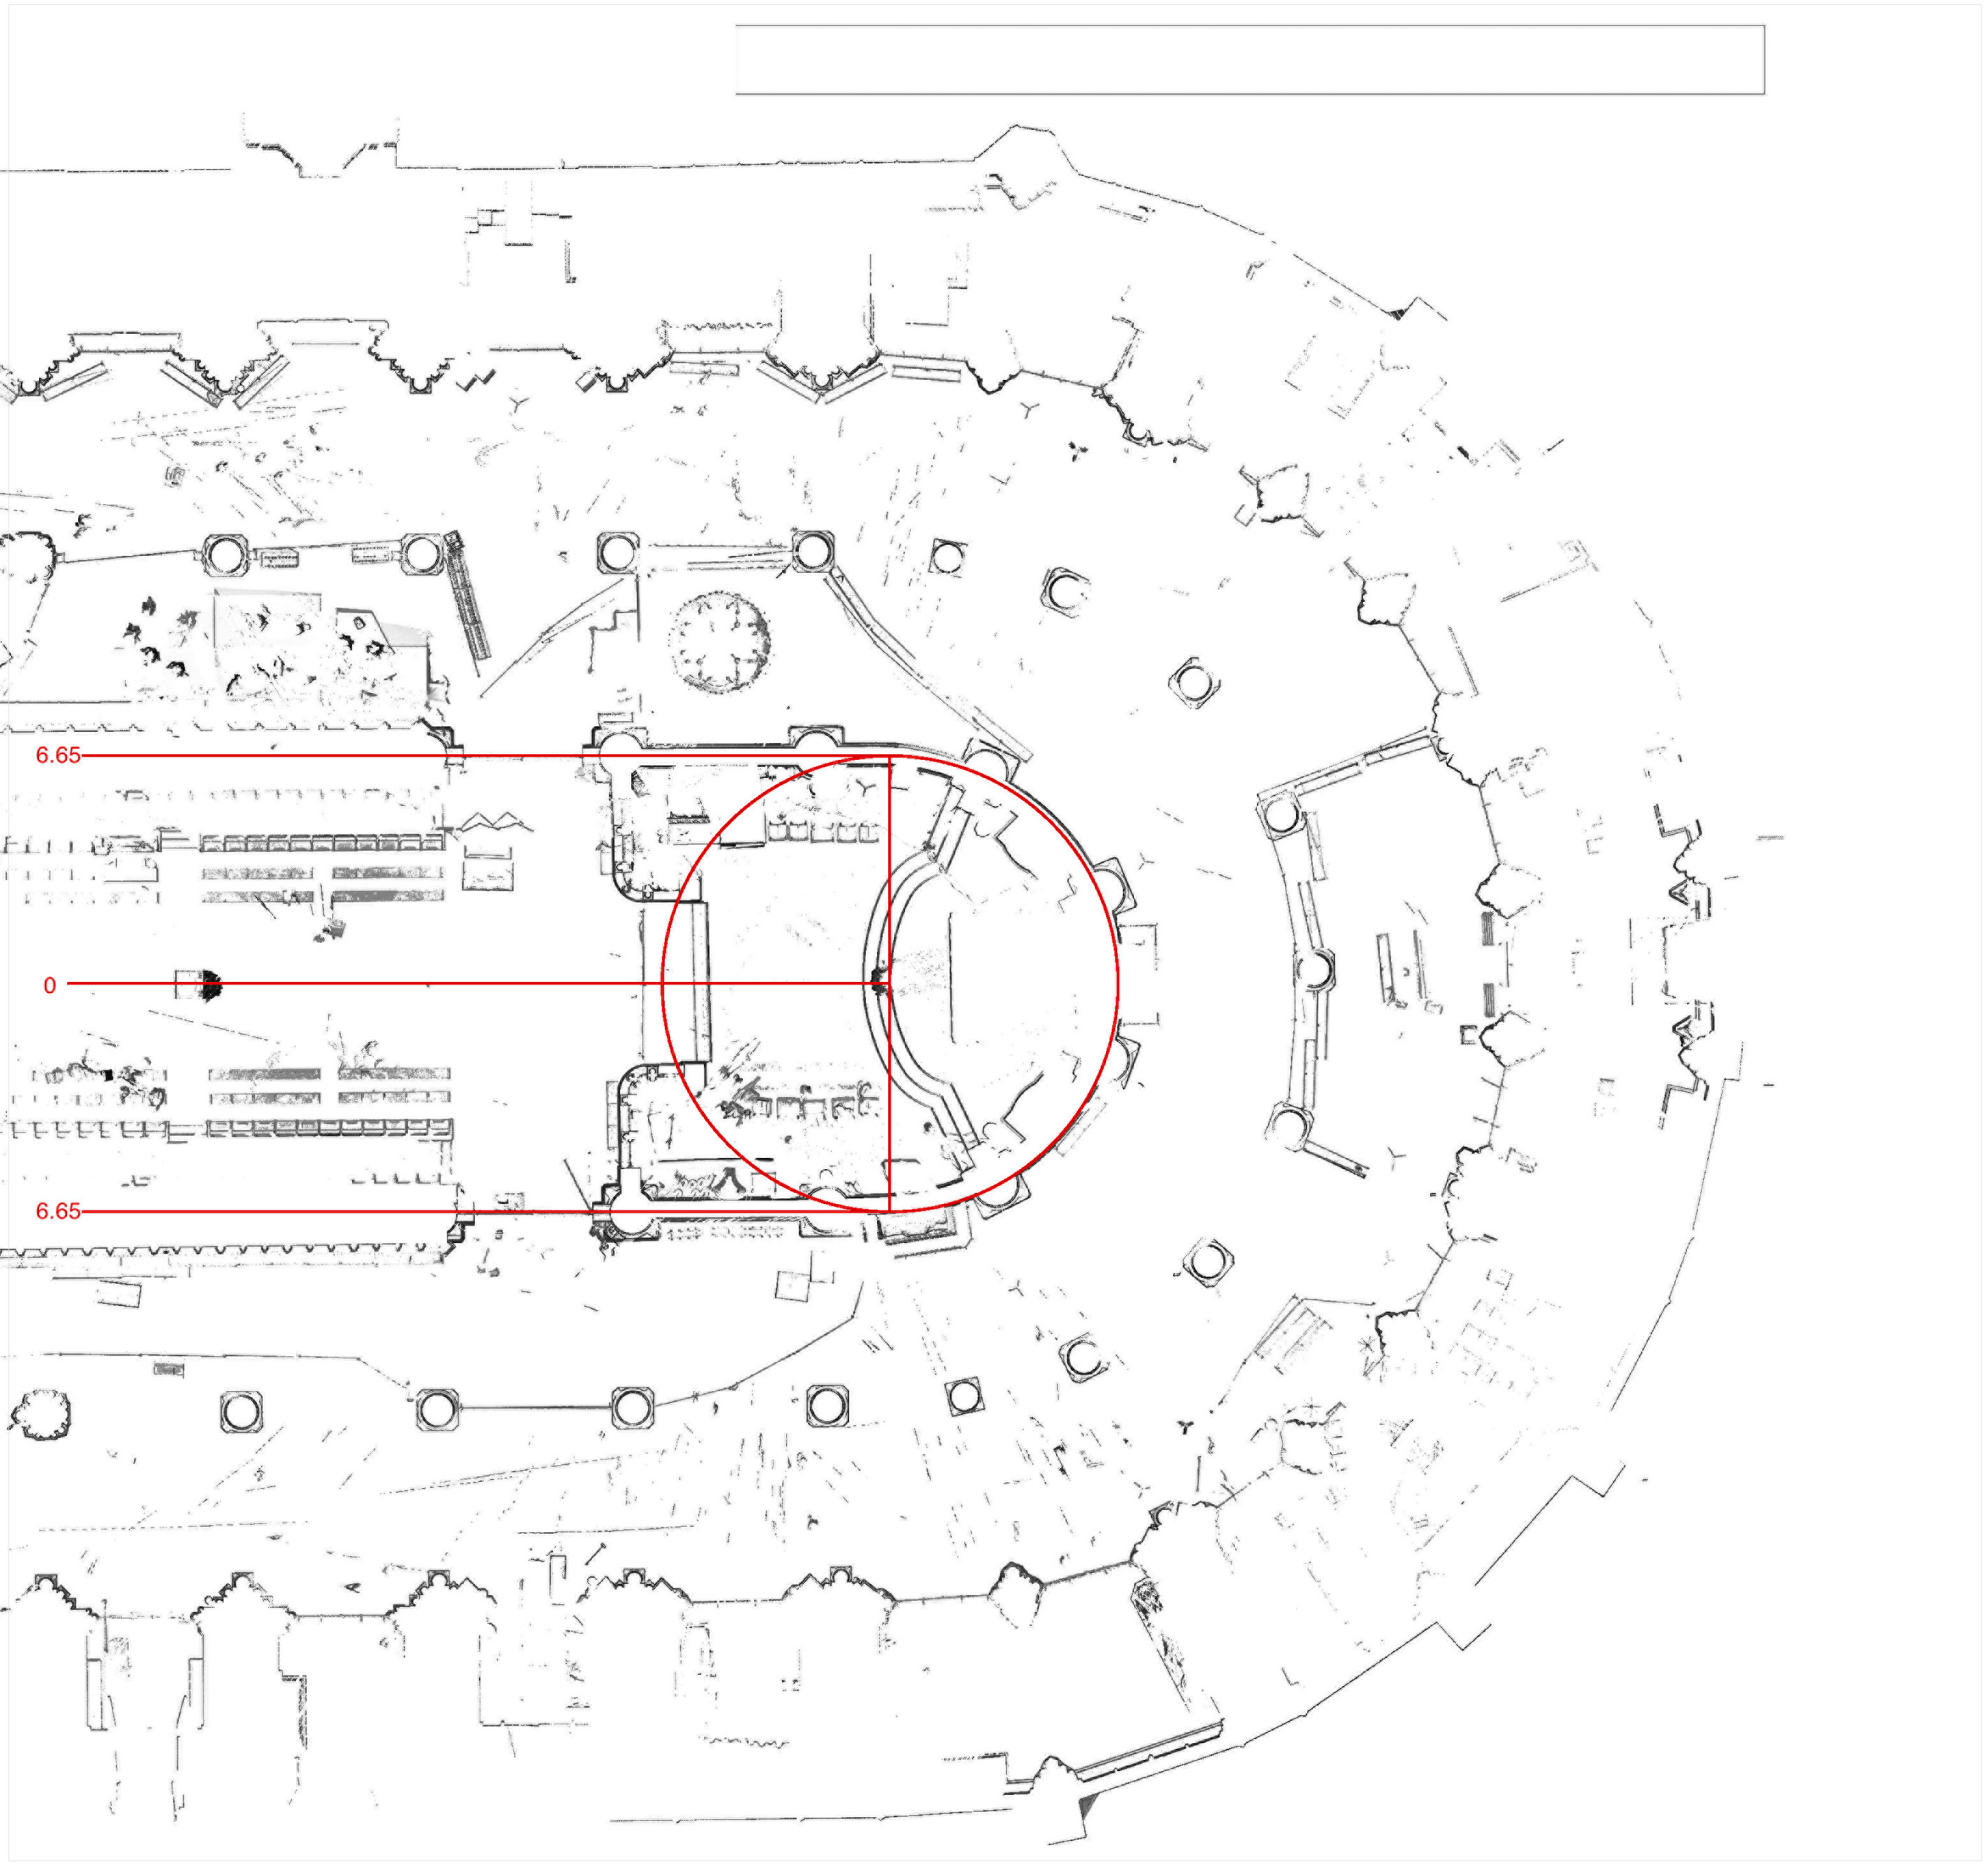 Partial plan of Notre-Dame in Paris, according to laser scan data by Andrew Tallon, showing construction of main arcade axes based on hemicycle circle.